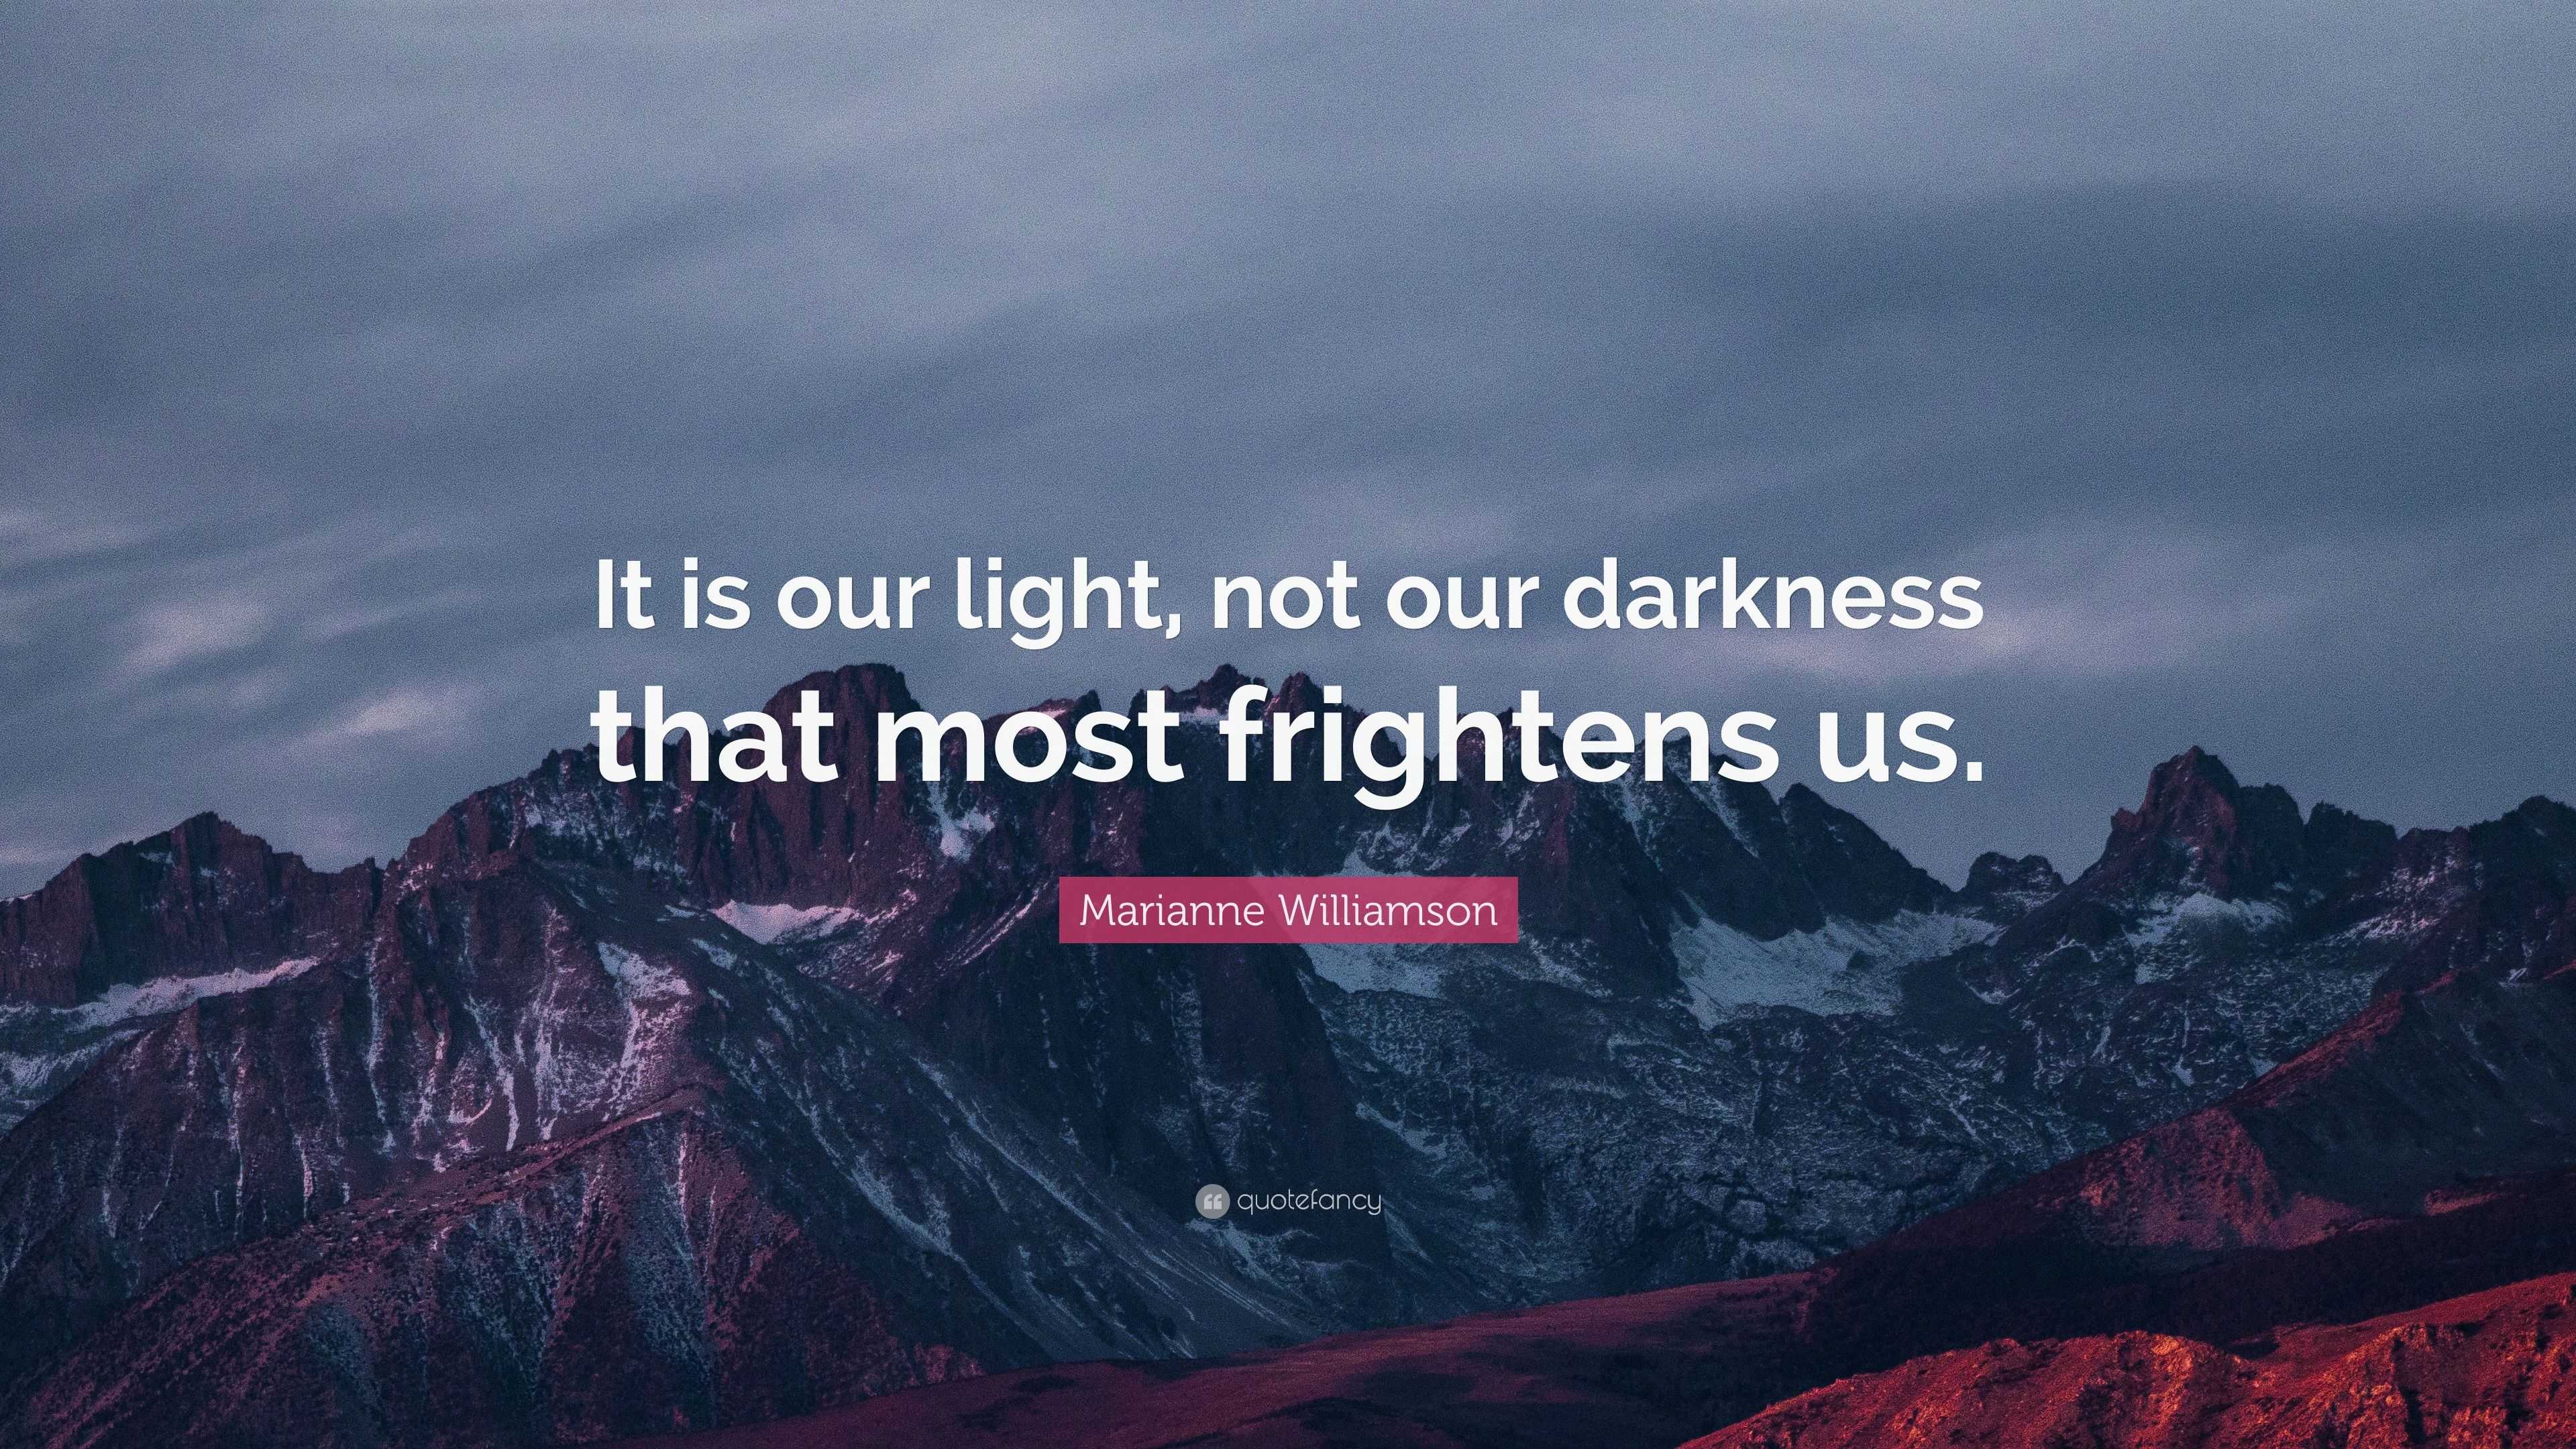 Marianne Williamson Quote: “It is our light, not our darkness that most ...